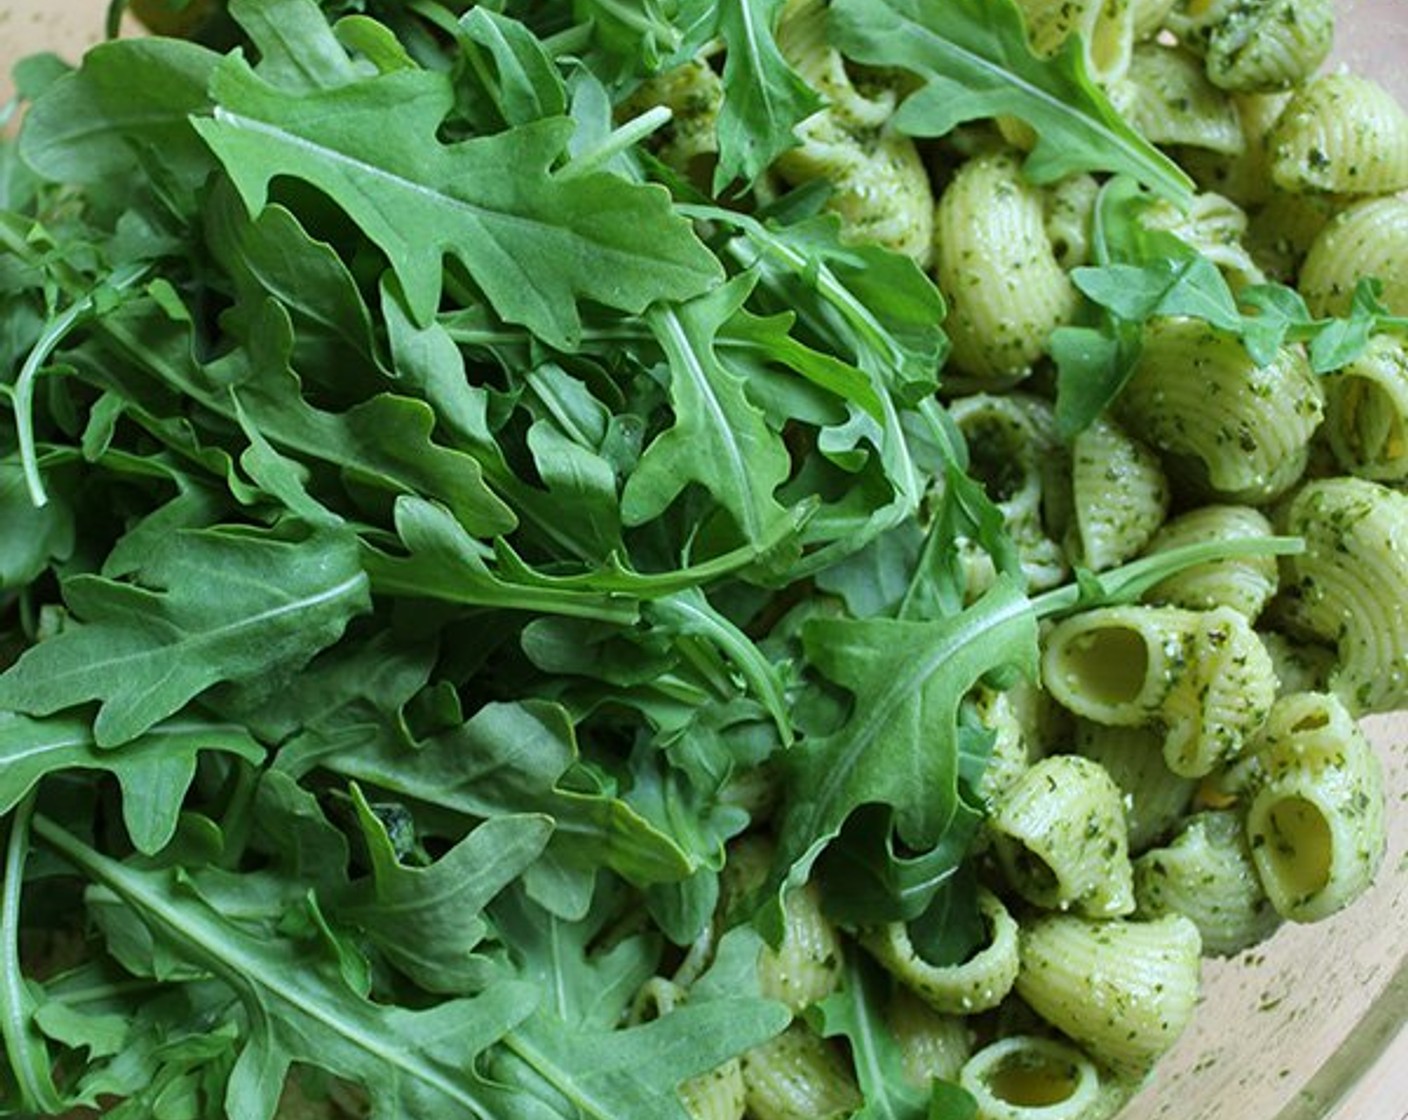 step 6 Add the pesto to the cooked pasta and toss well to coat. Add the Baby Arugula (2 cups) and the remaining Pine Nuts (2 Tbsp) and toss again.